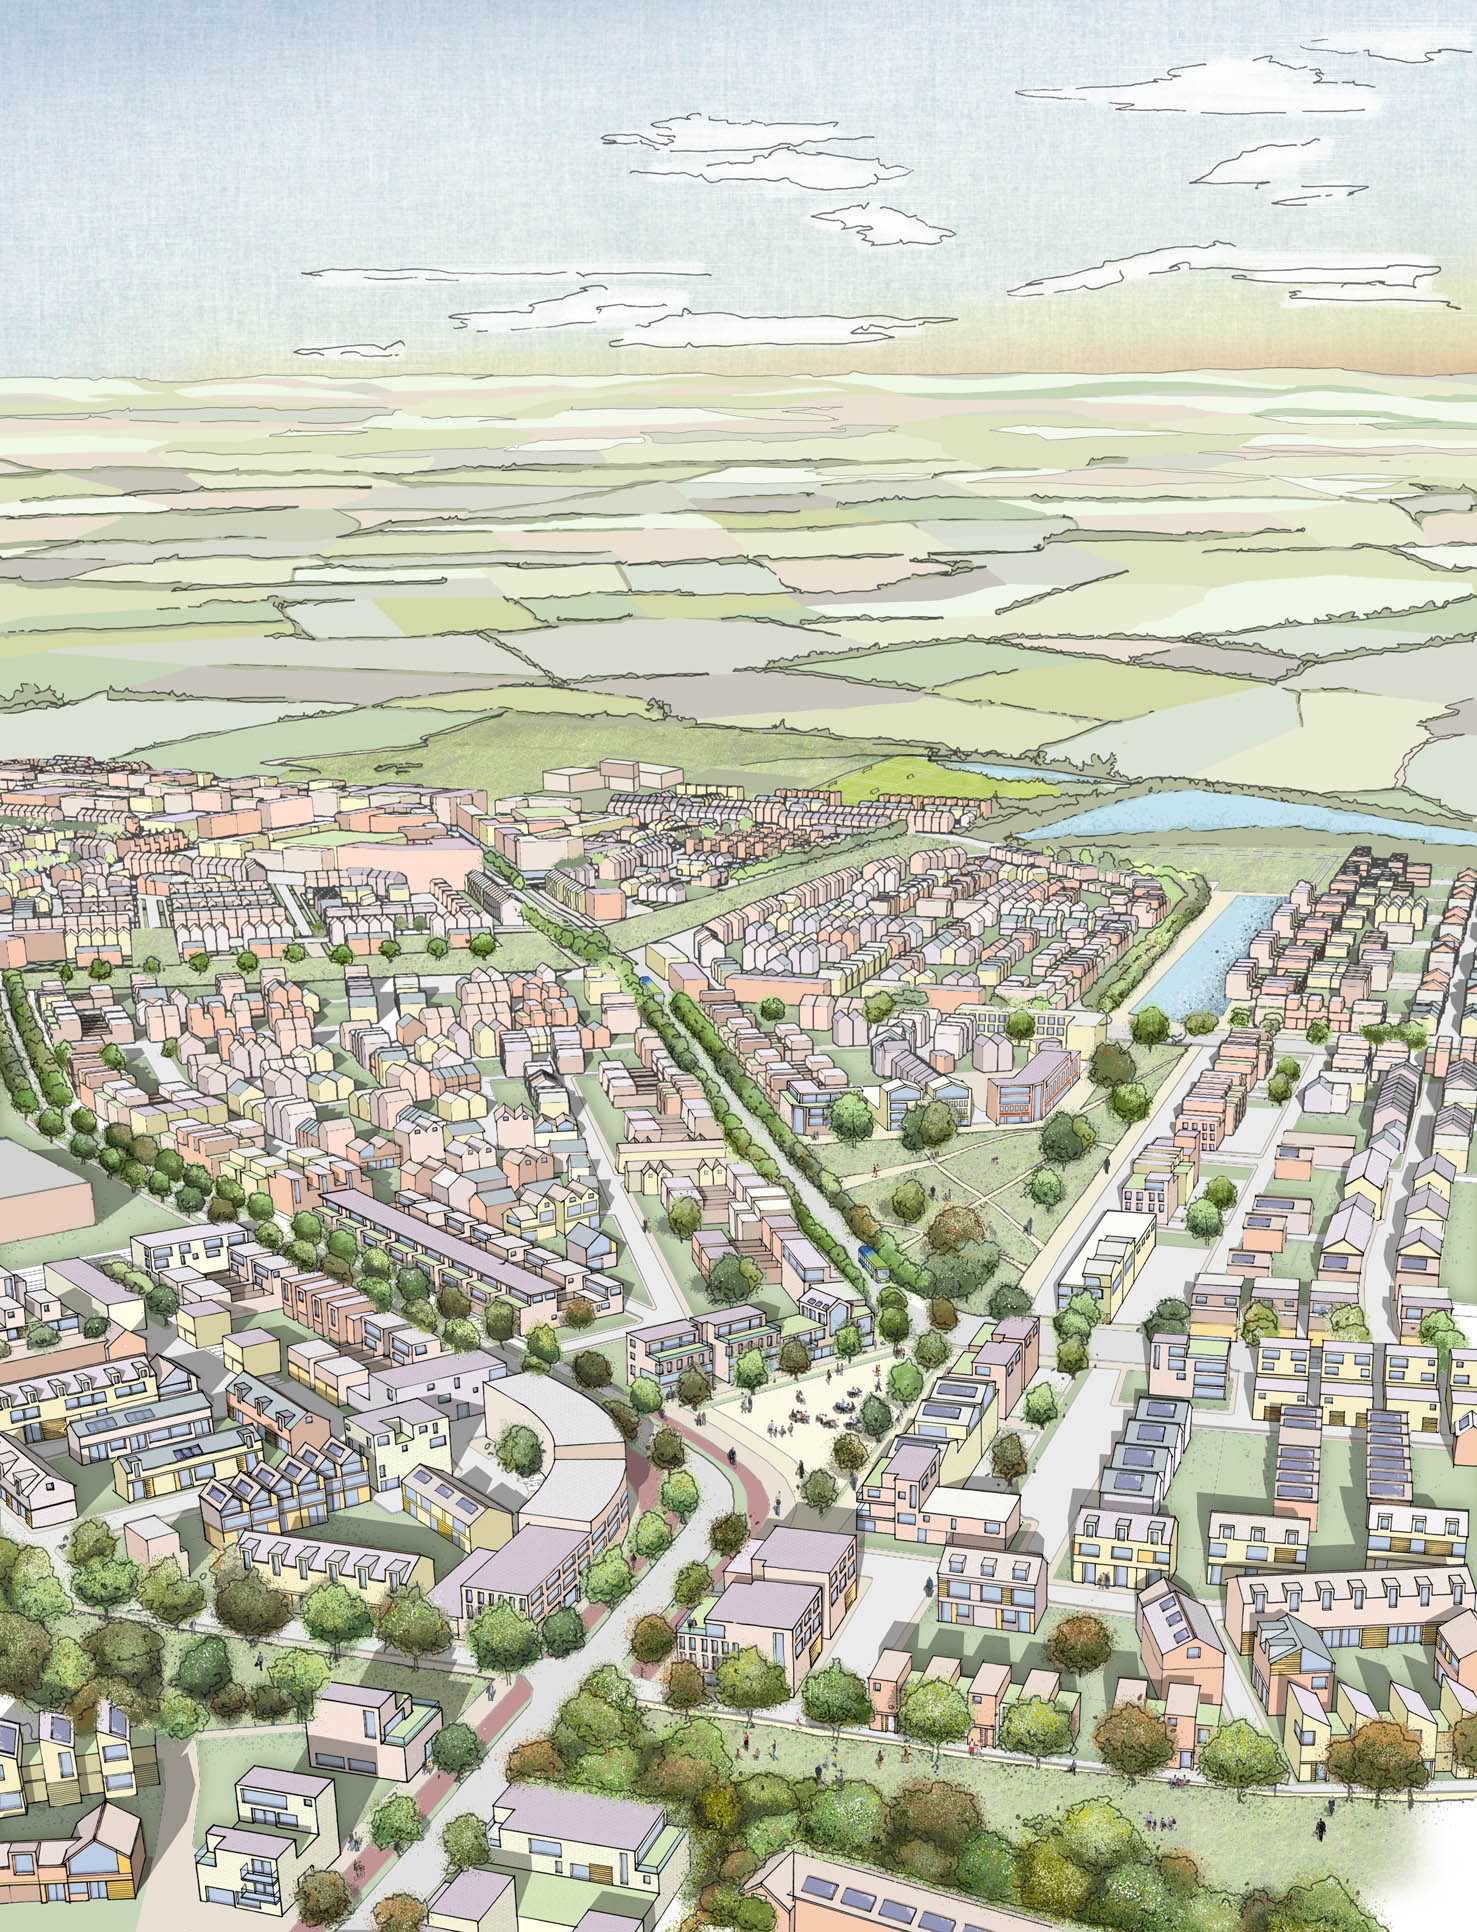 Significant milestone for Northstowe as 4,000 new homes and £123m of masterplan funding secured